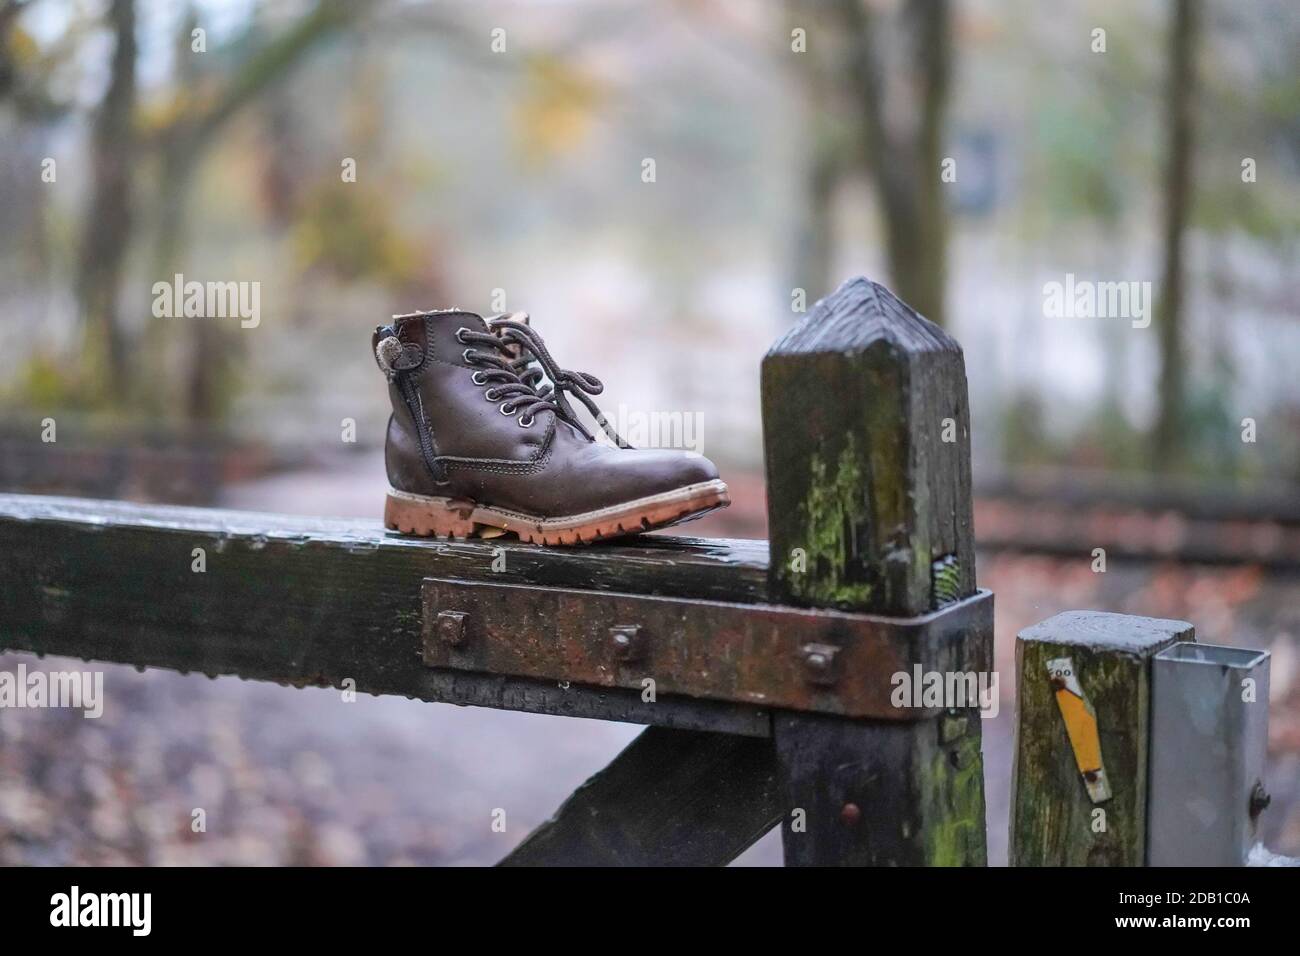 One lost, brown, walking boot left outdoors in UK woodland, isolated on a country gate in pouring rain. Stock Photo